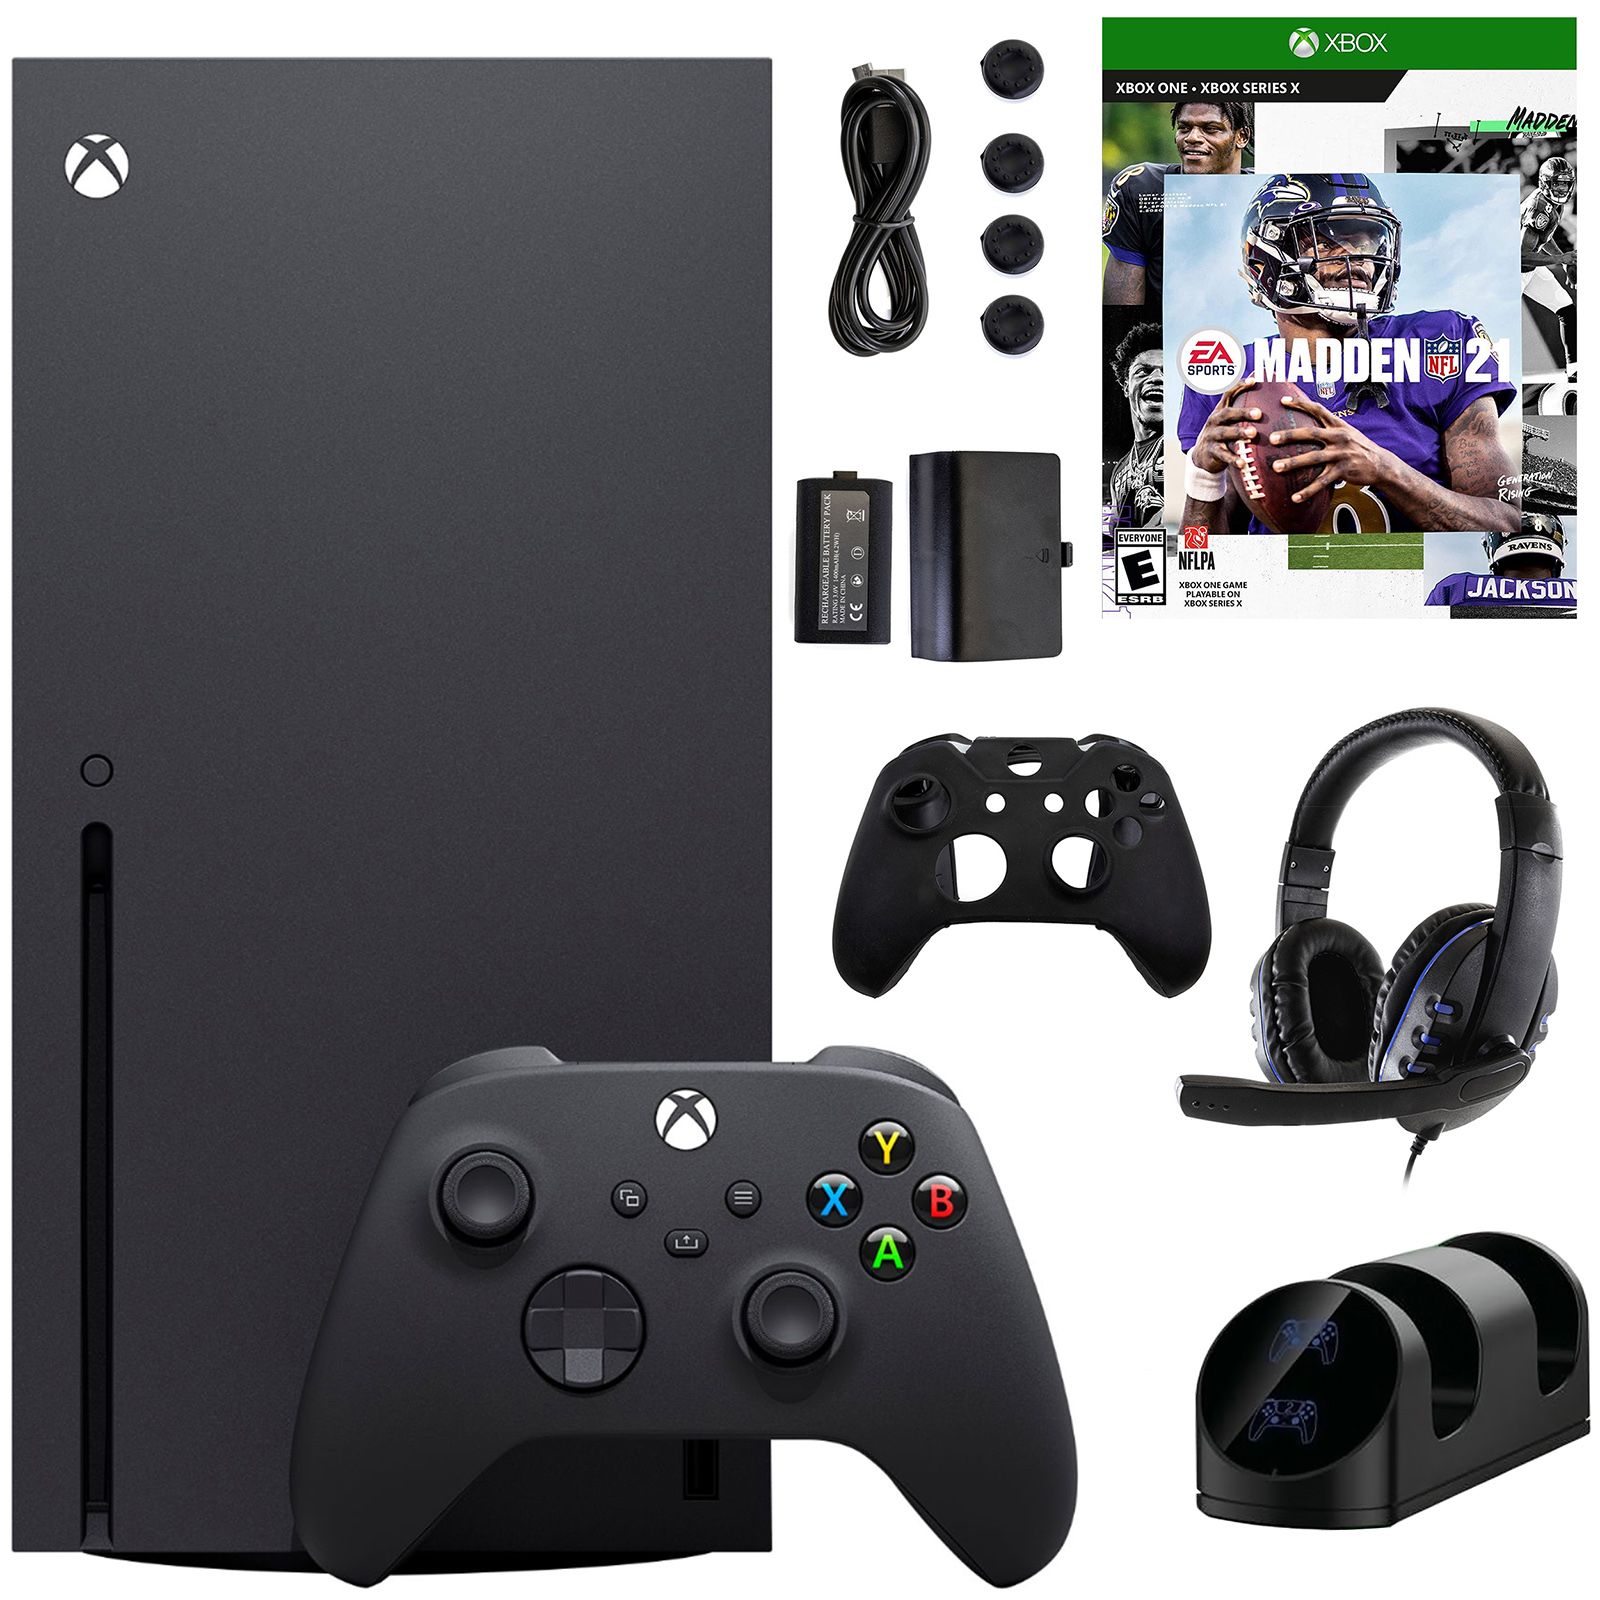 Microsoft Xbox Series X 1TB Console with Madden 21 Game and Accessories Kit